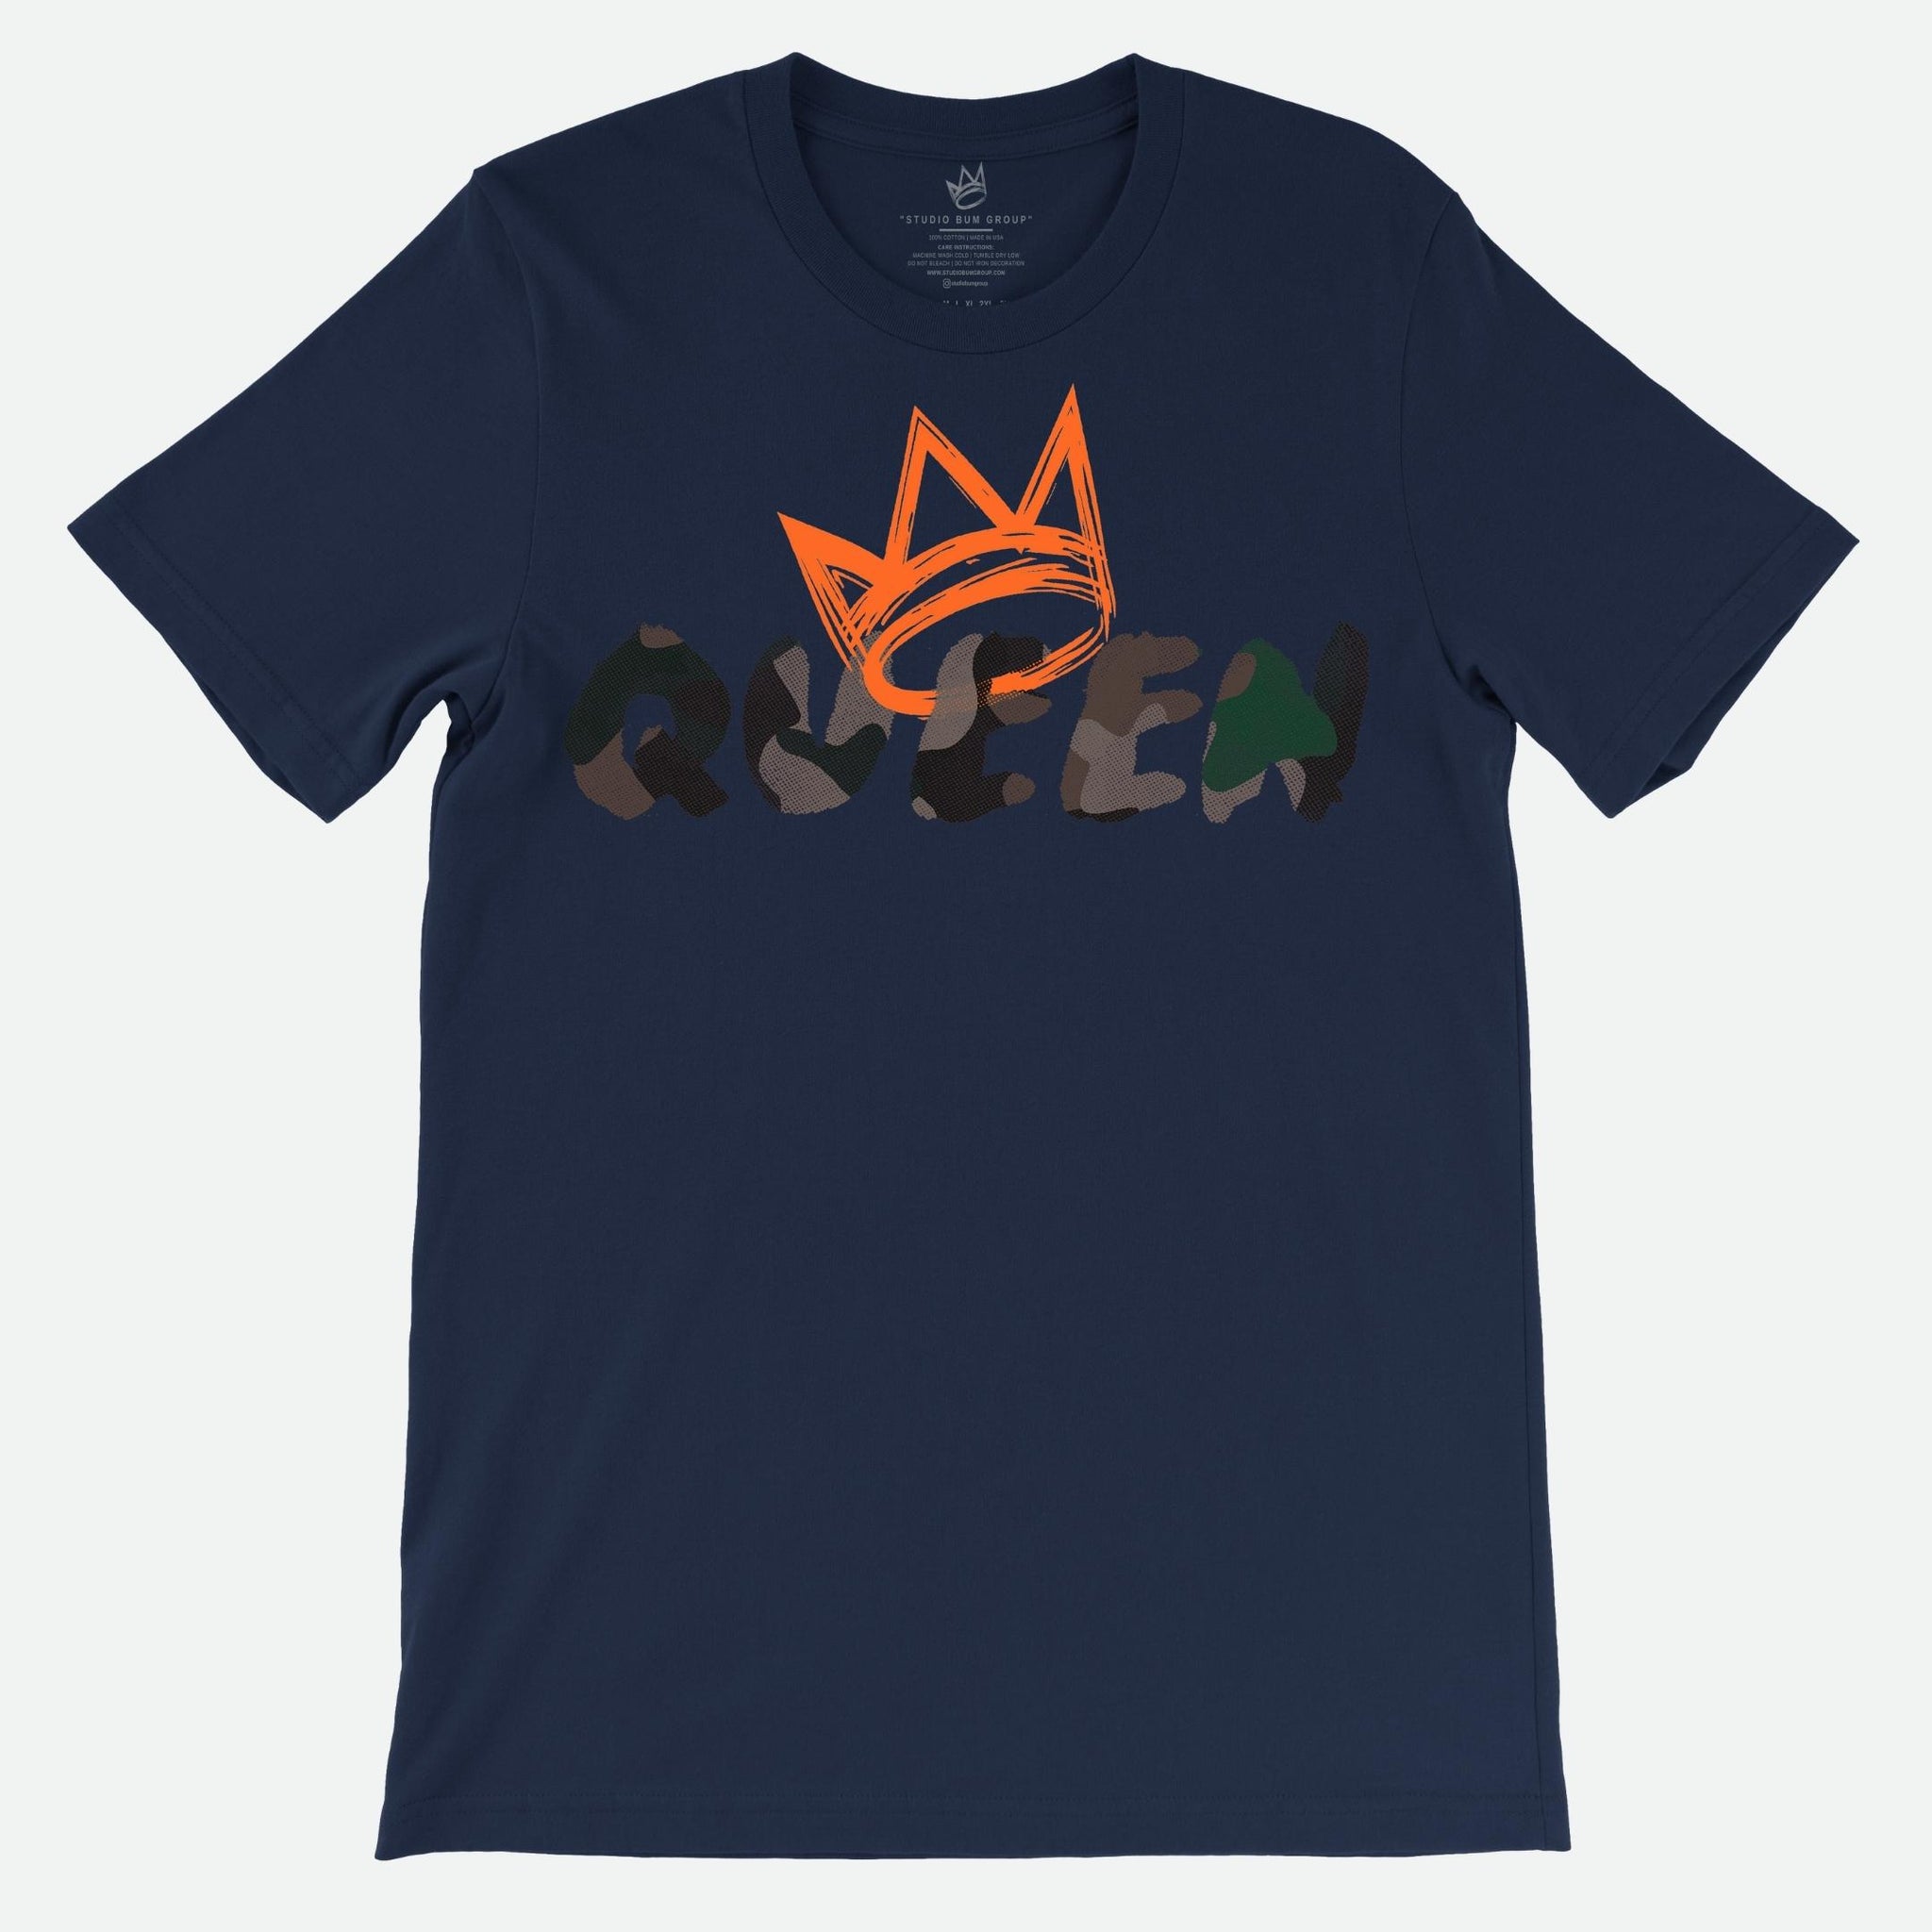 Queen T-Shirt Camouflage Print